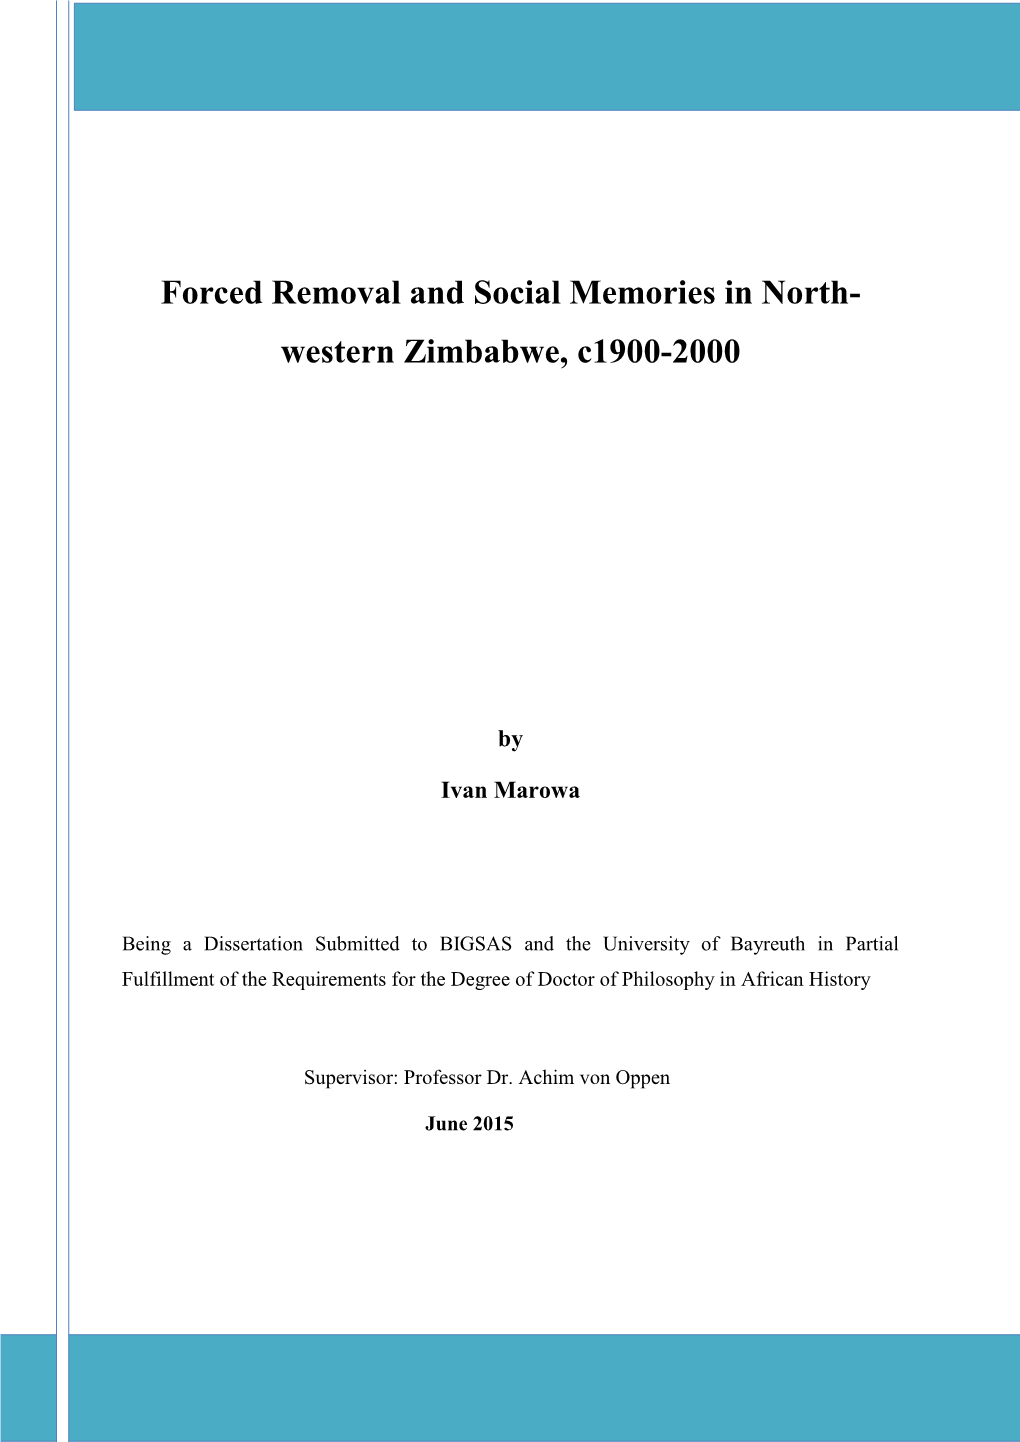 Forced Removal and Social Memories in North-Western Zimbabwe C1900